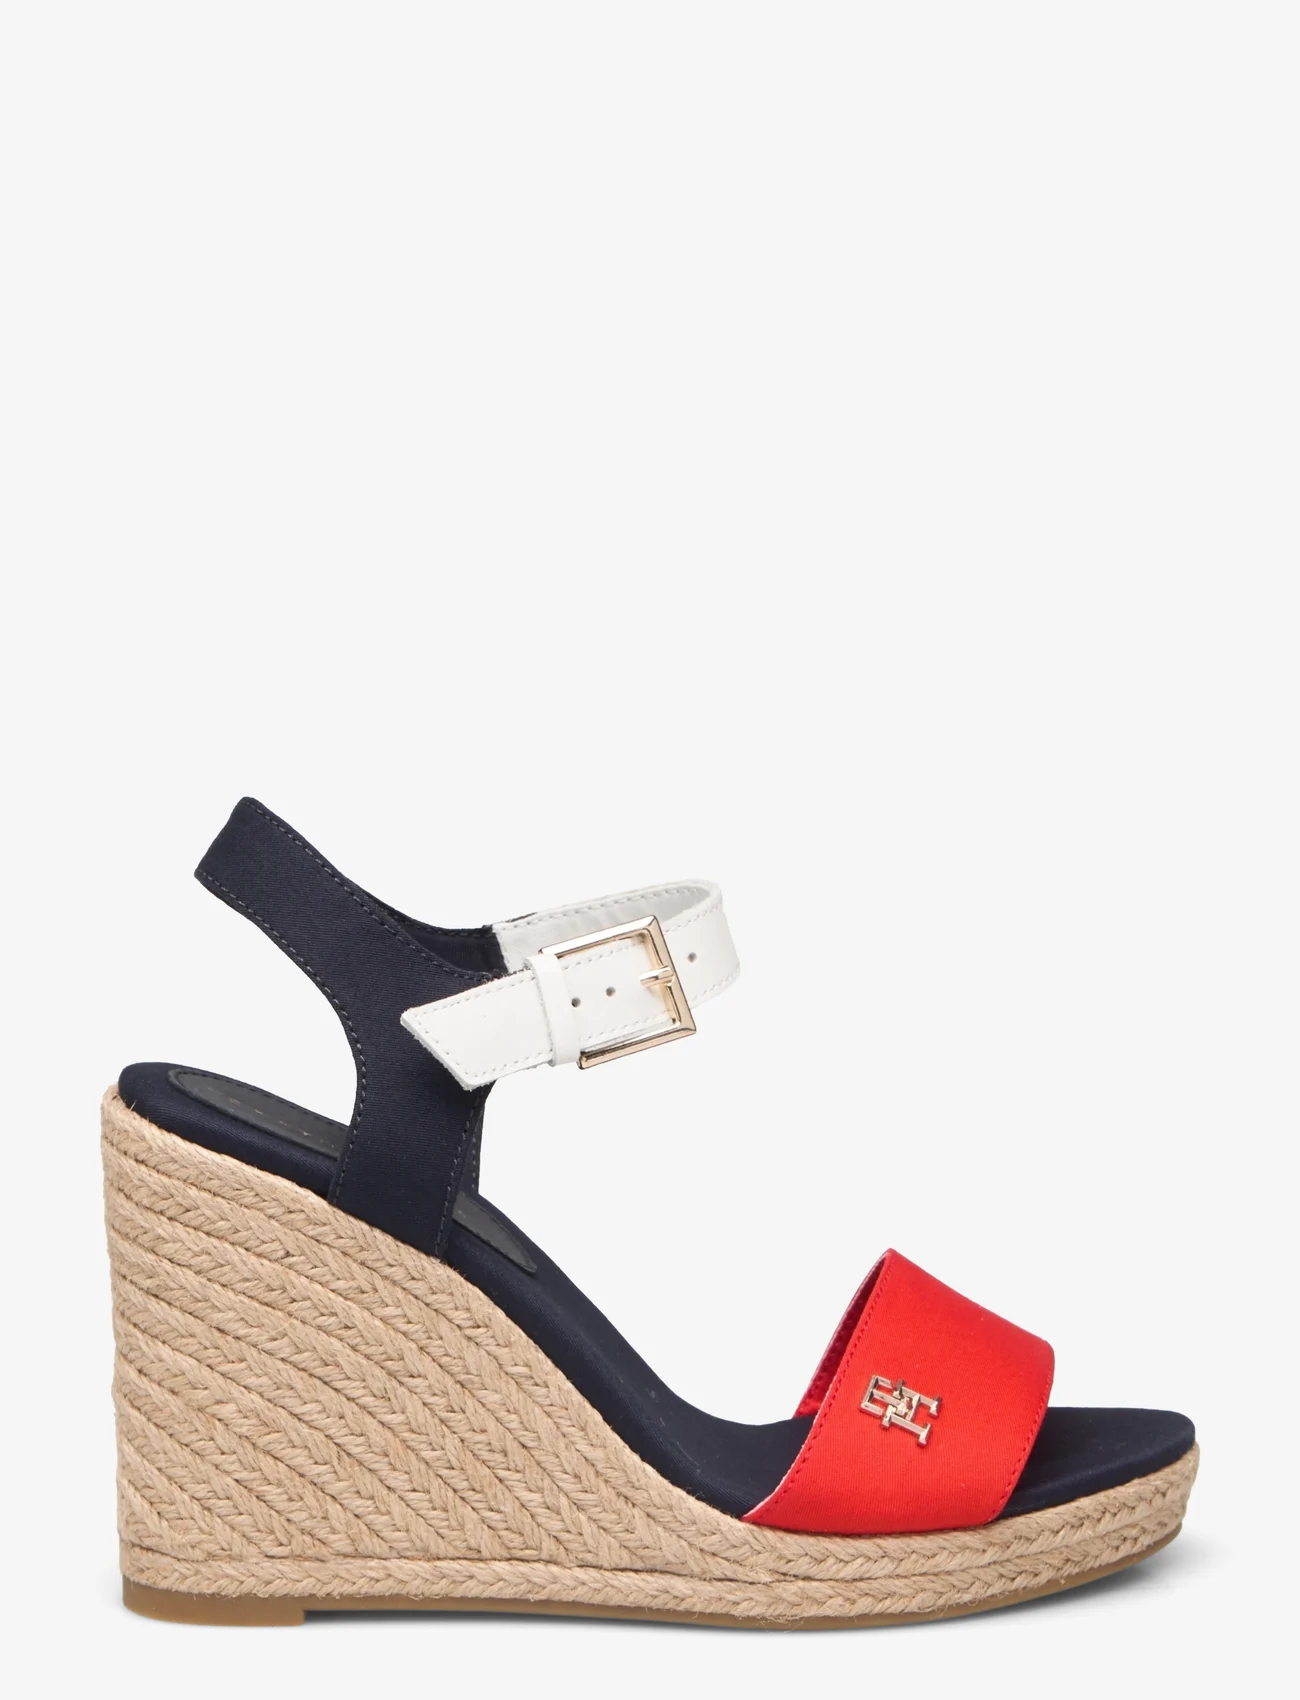 Tommy Hilfiger - STRIPES WEDGE SANDAL - juhlamuotia outlet-hintaan - red white blue - 1